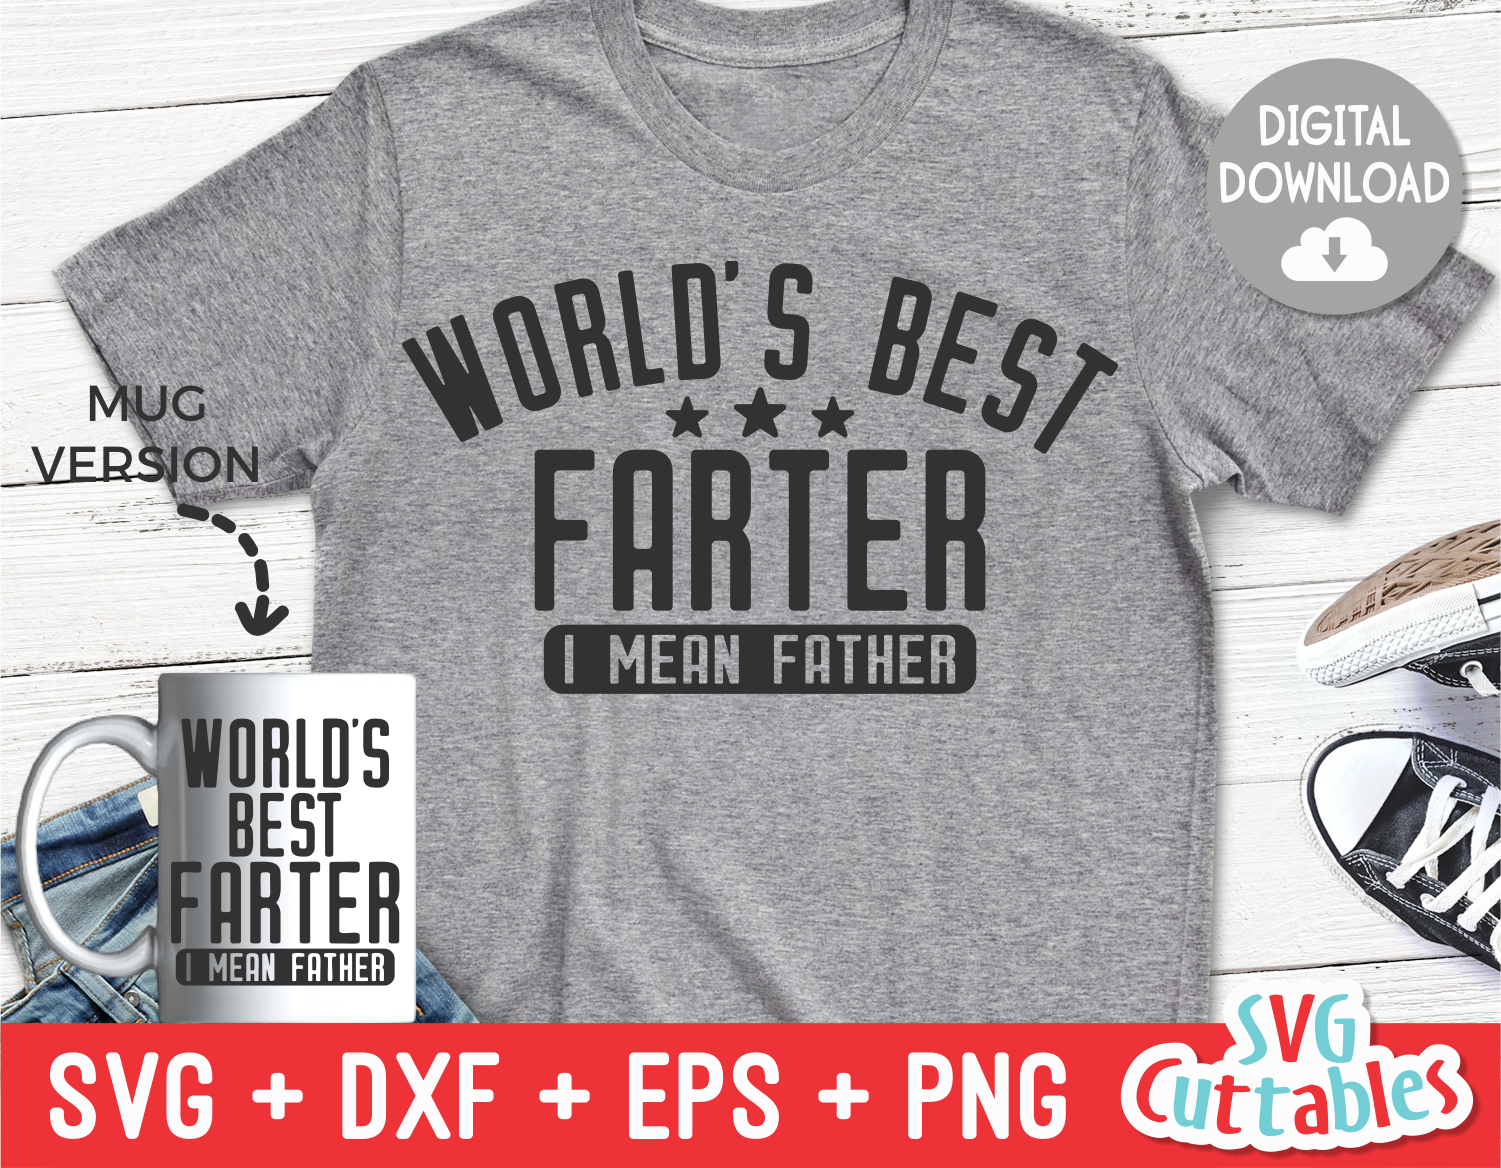 Download World's Best Farter | Father's Day | SVG Cut File ...